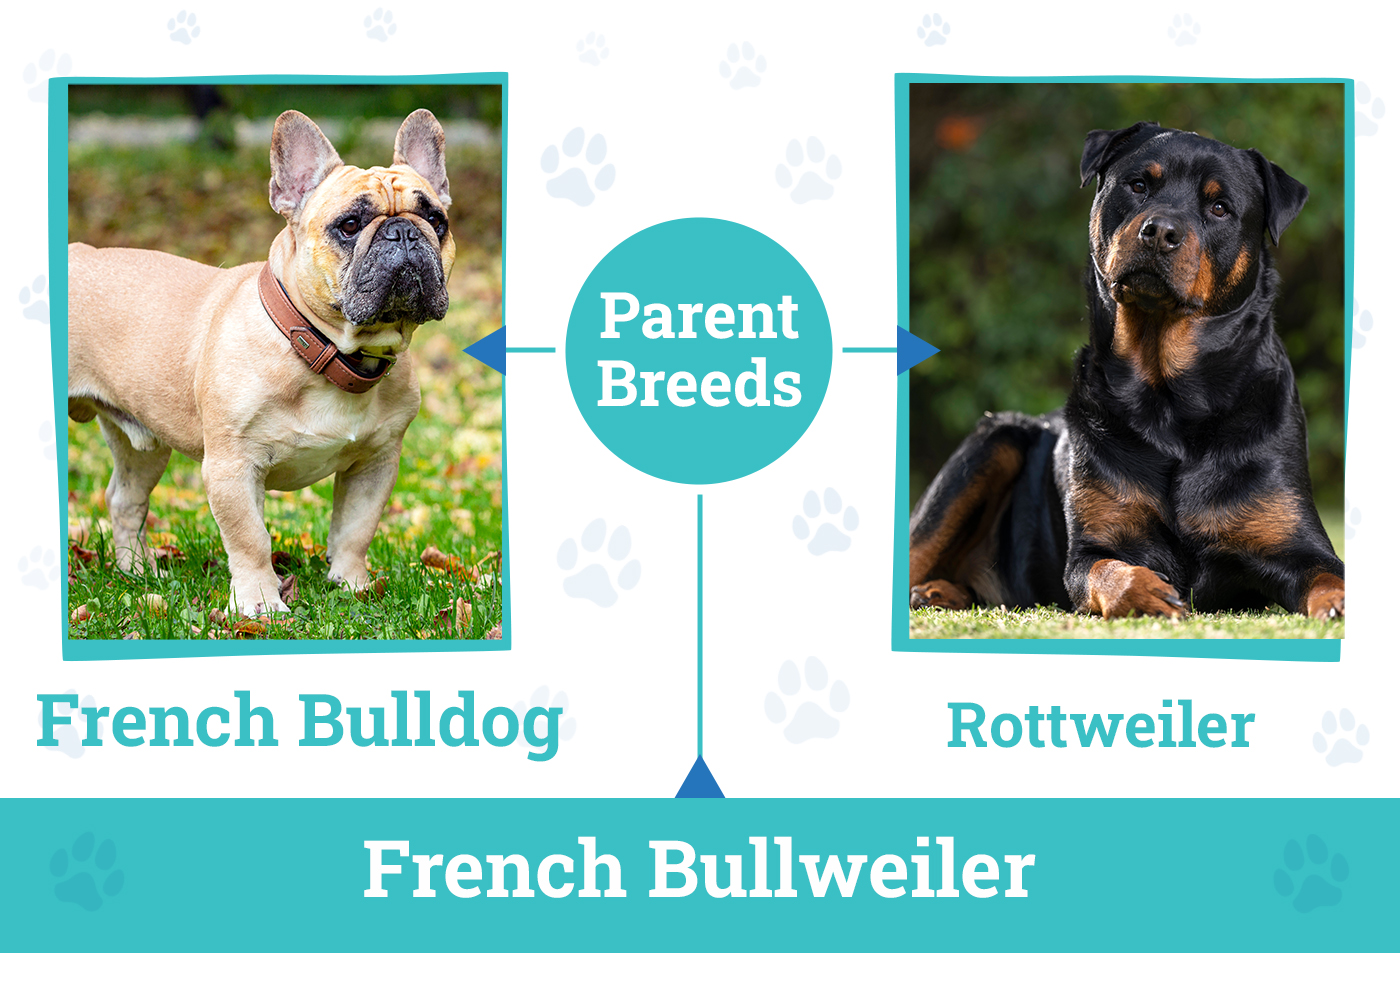 Parent Breeds of the French Bullweiler